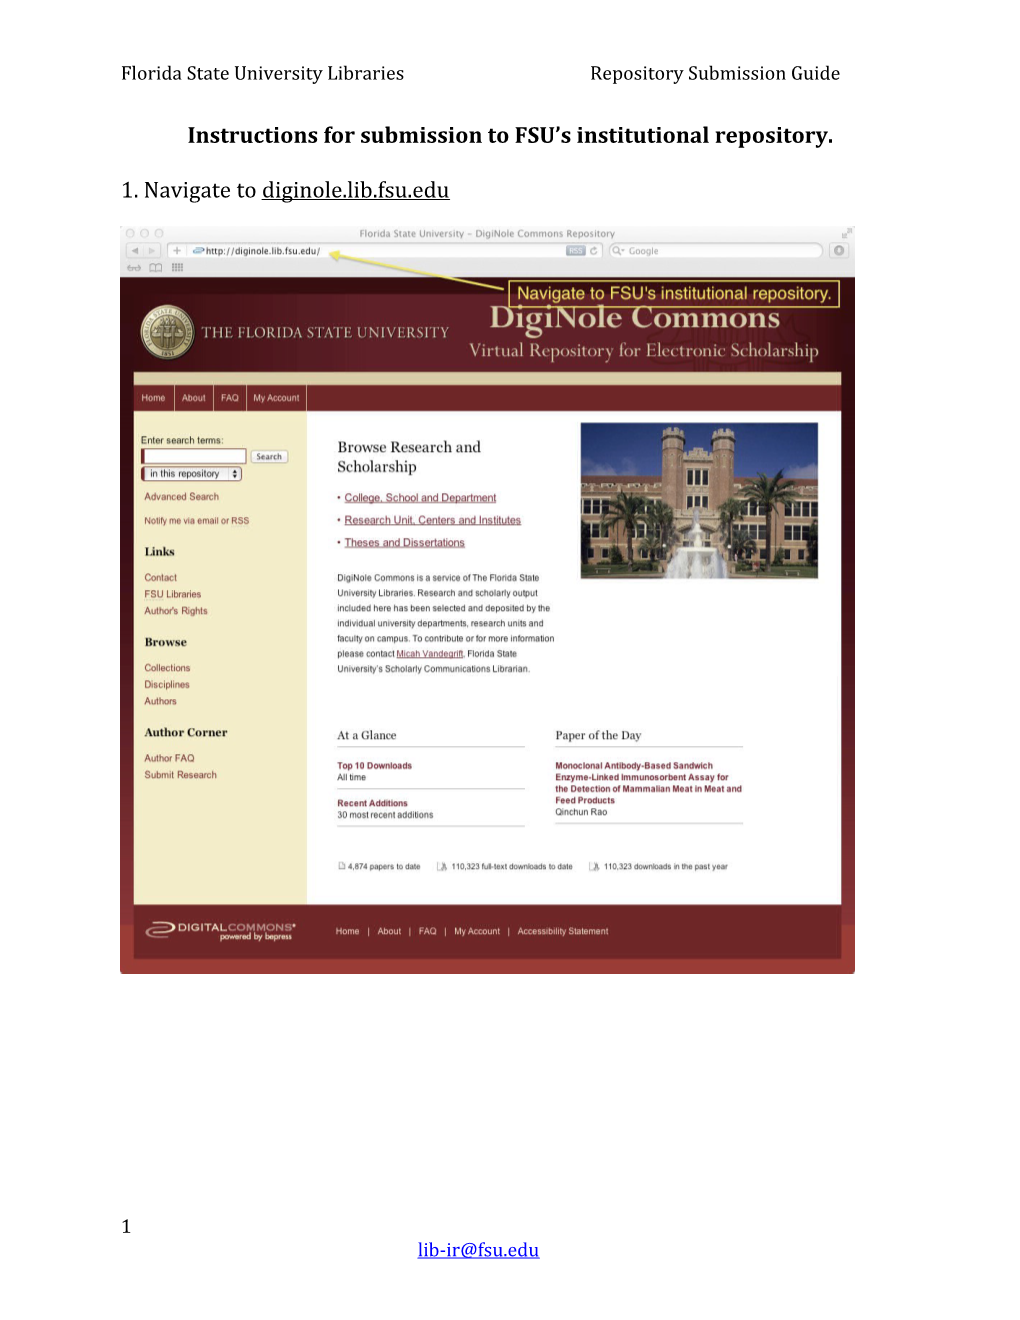 Instructions for Submission to FSU S Institutional Repository